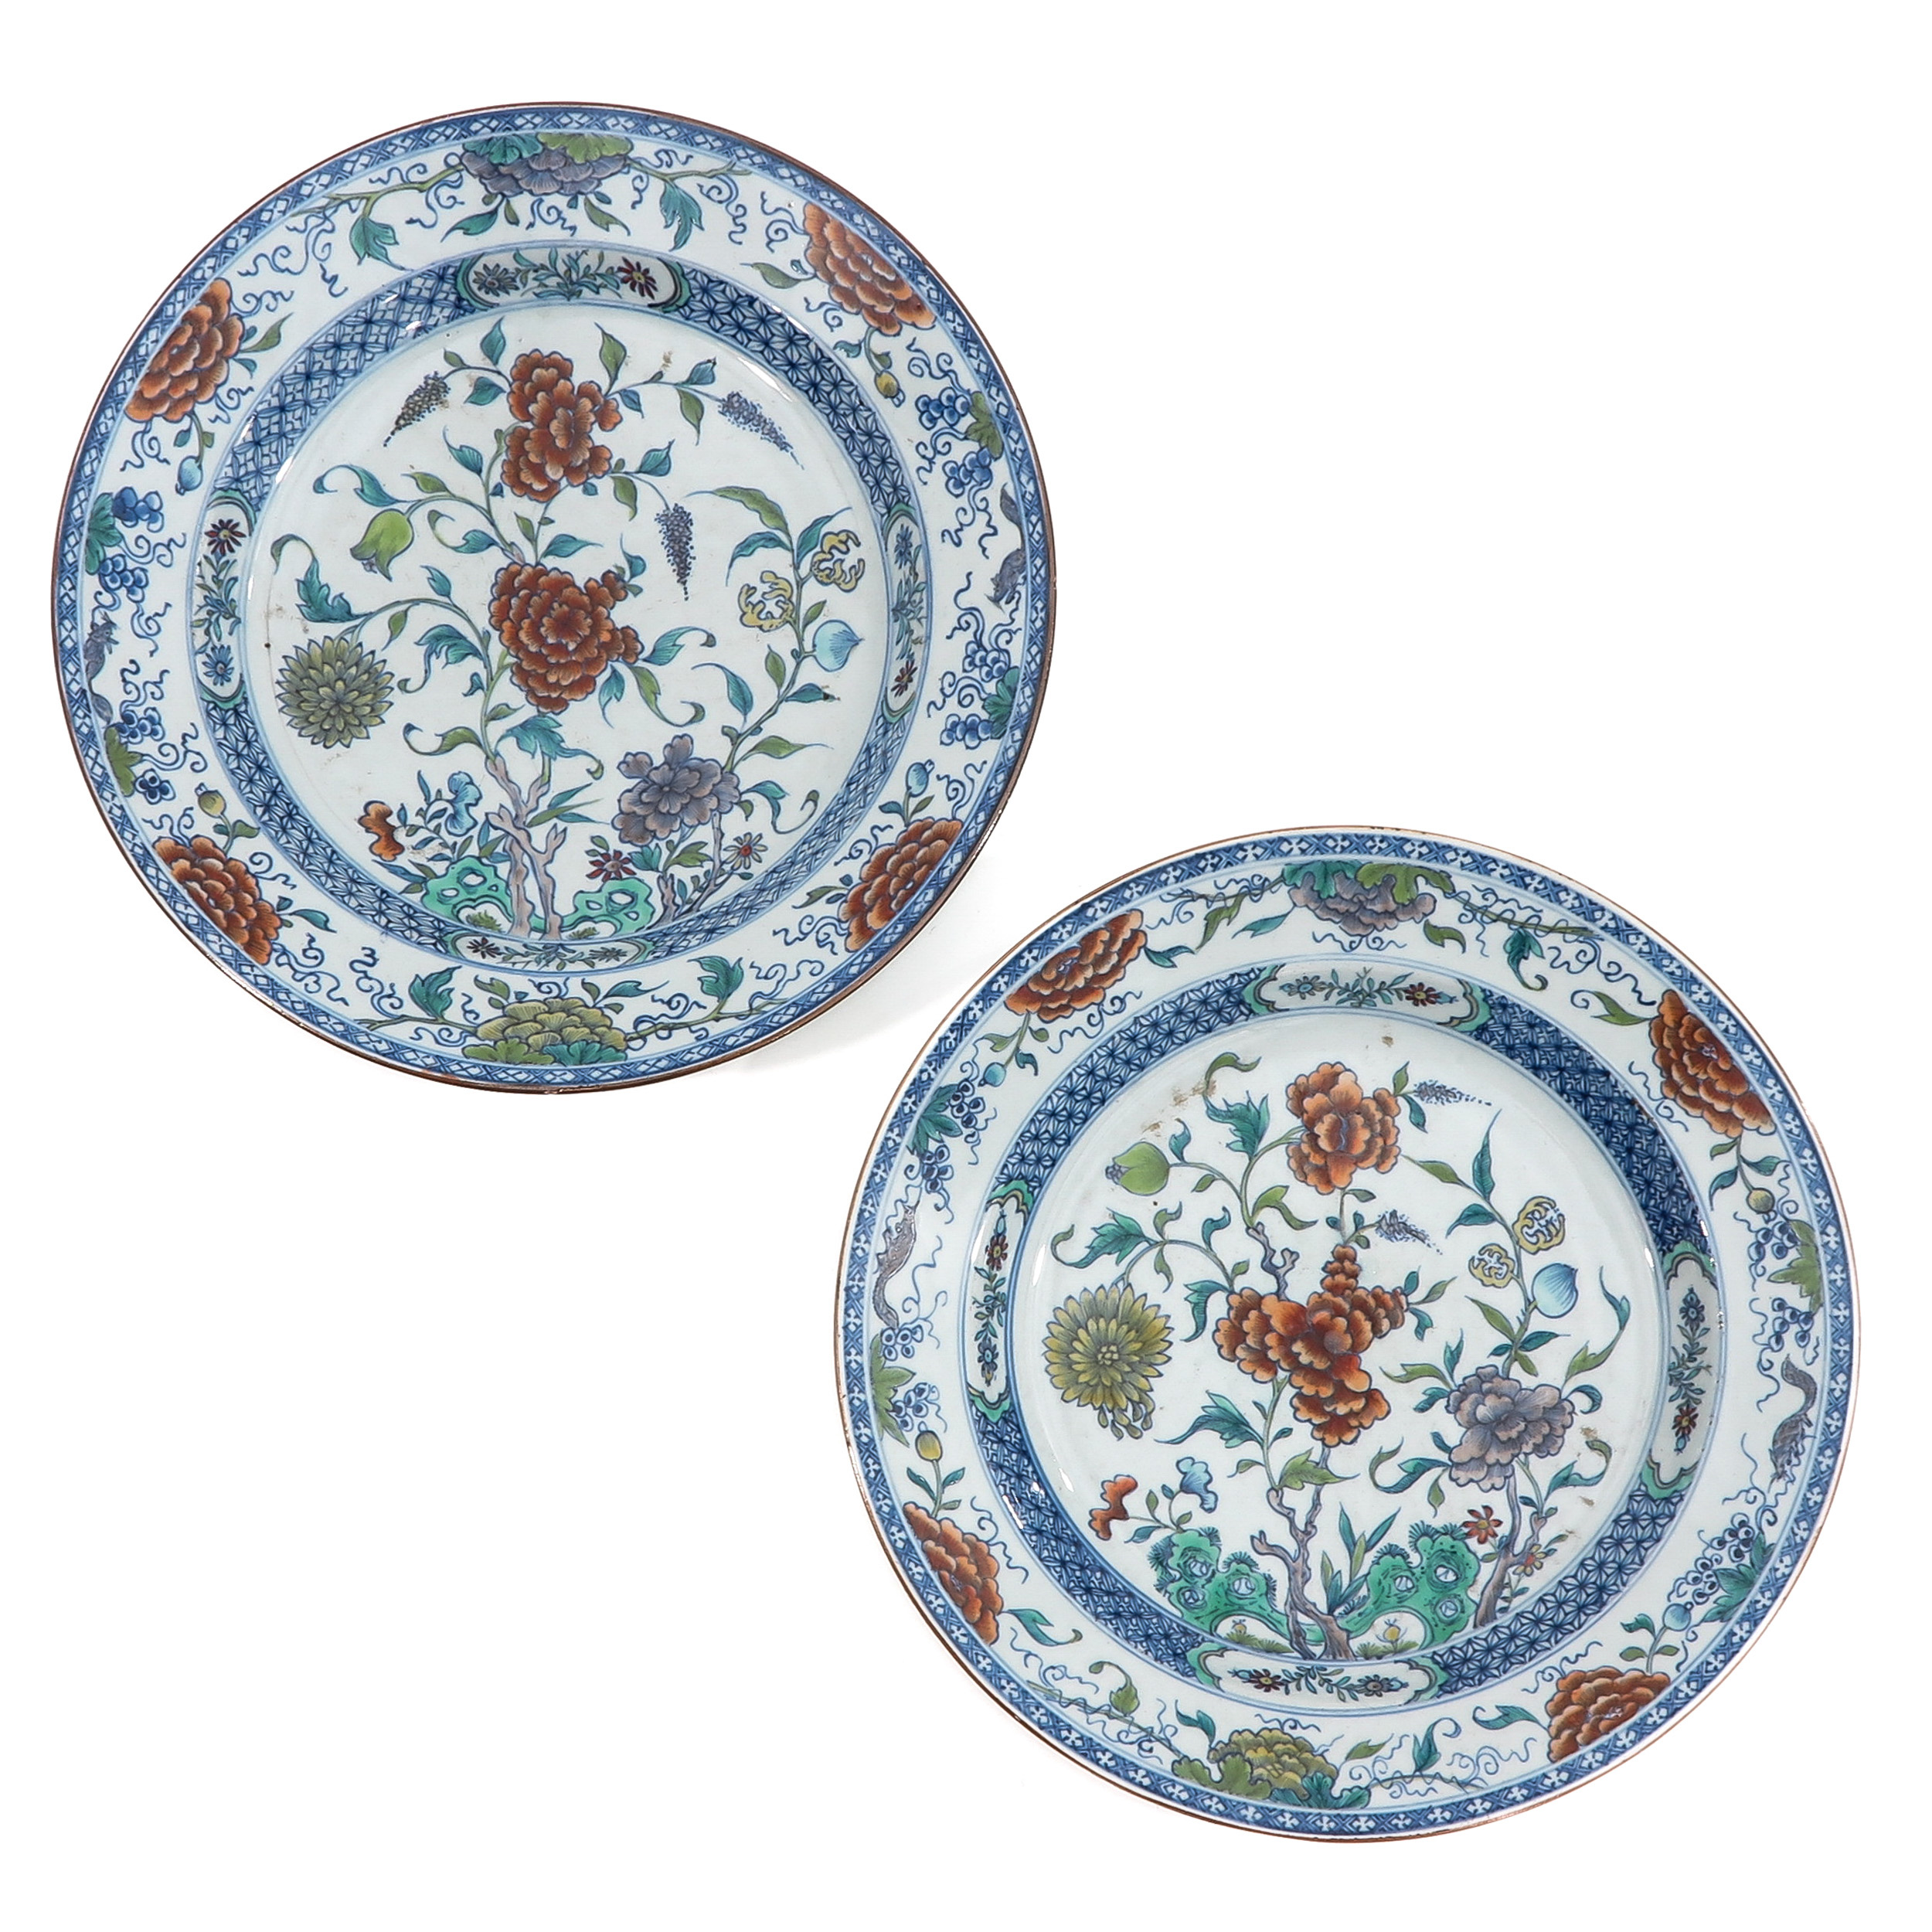 A Pair of Round Doucai Decor Charger